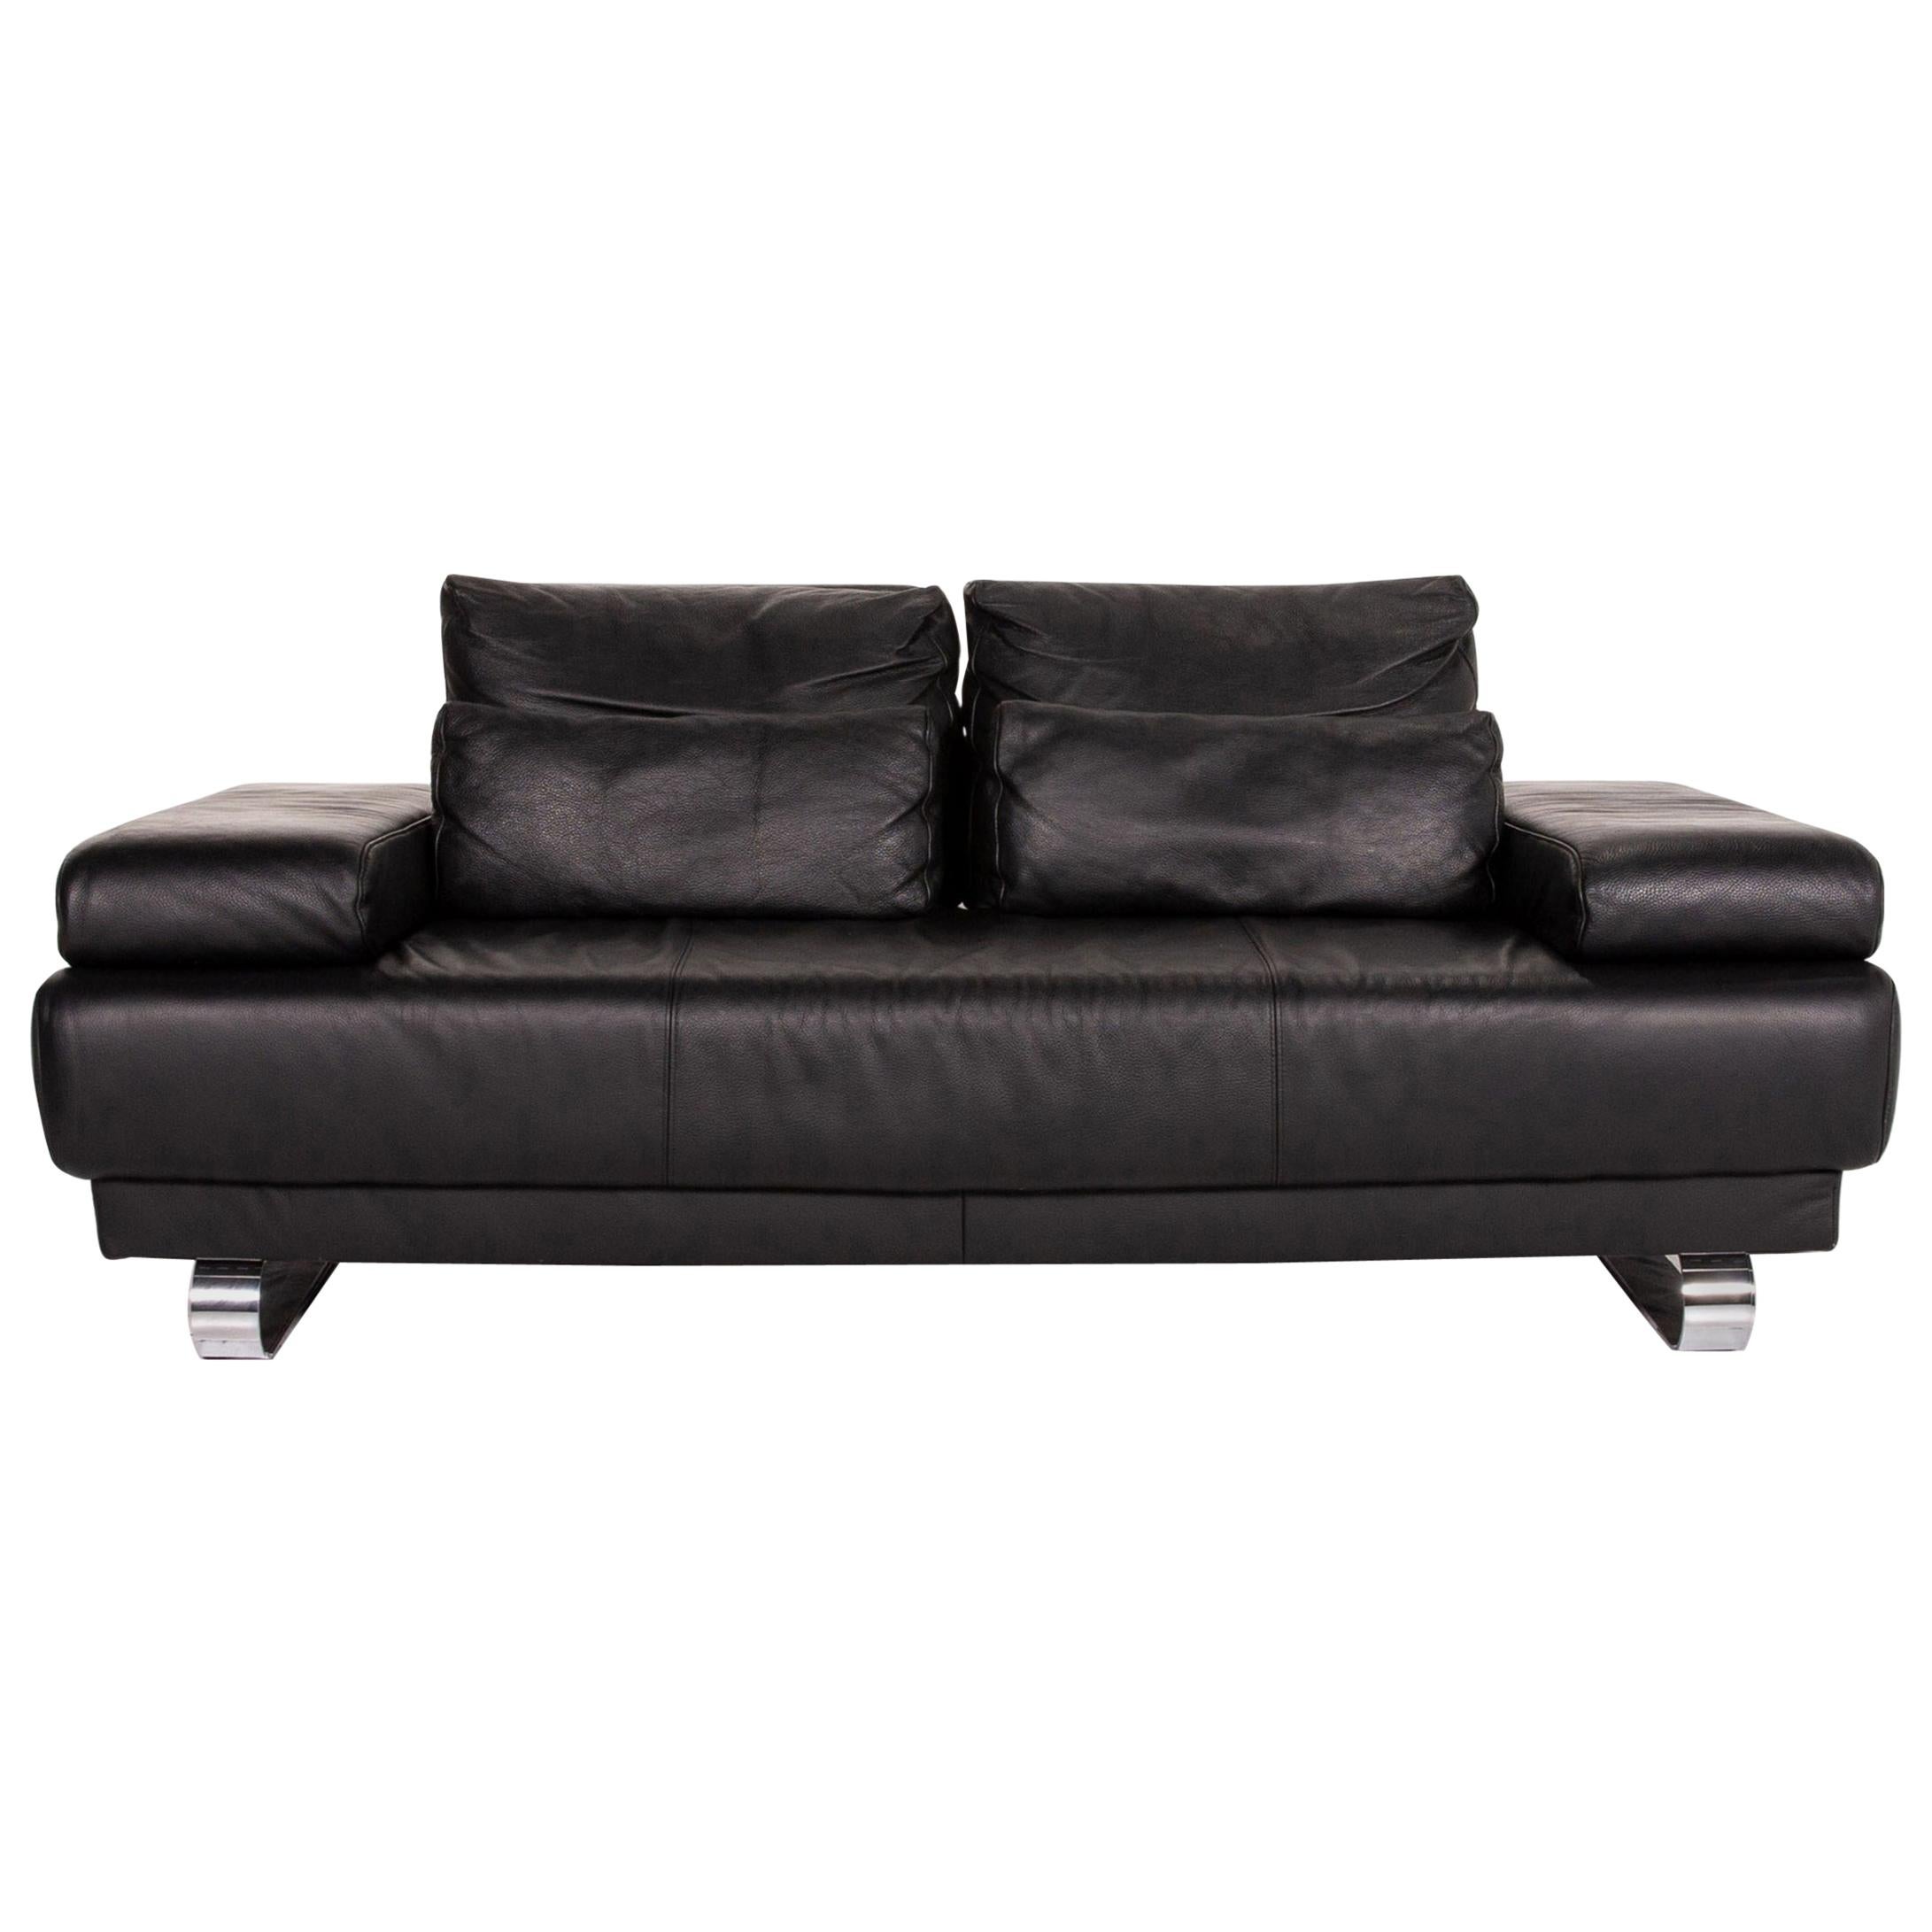 Ewald Schillig Harry Leather Sofa Black Two-Seat Function Couch For Sale